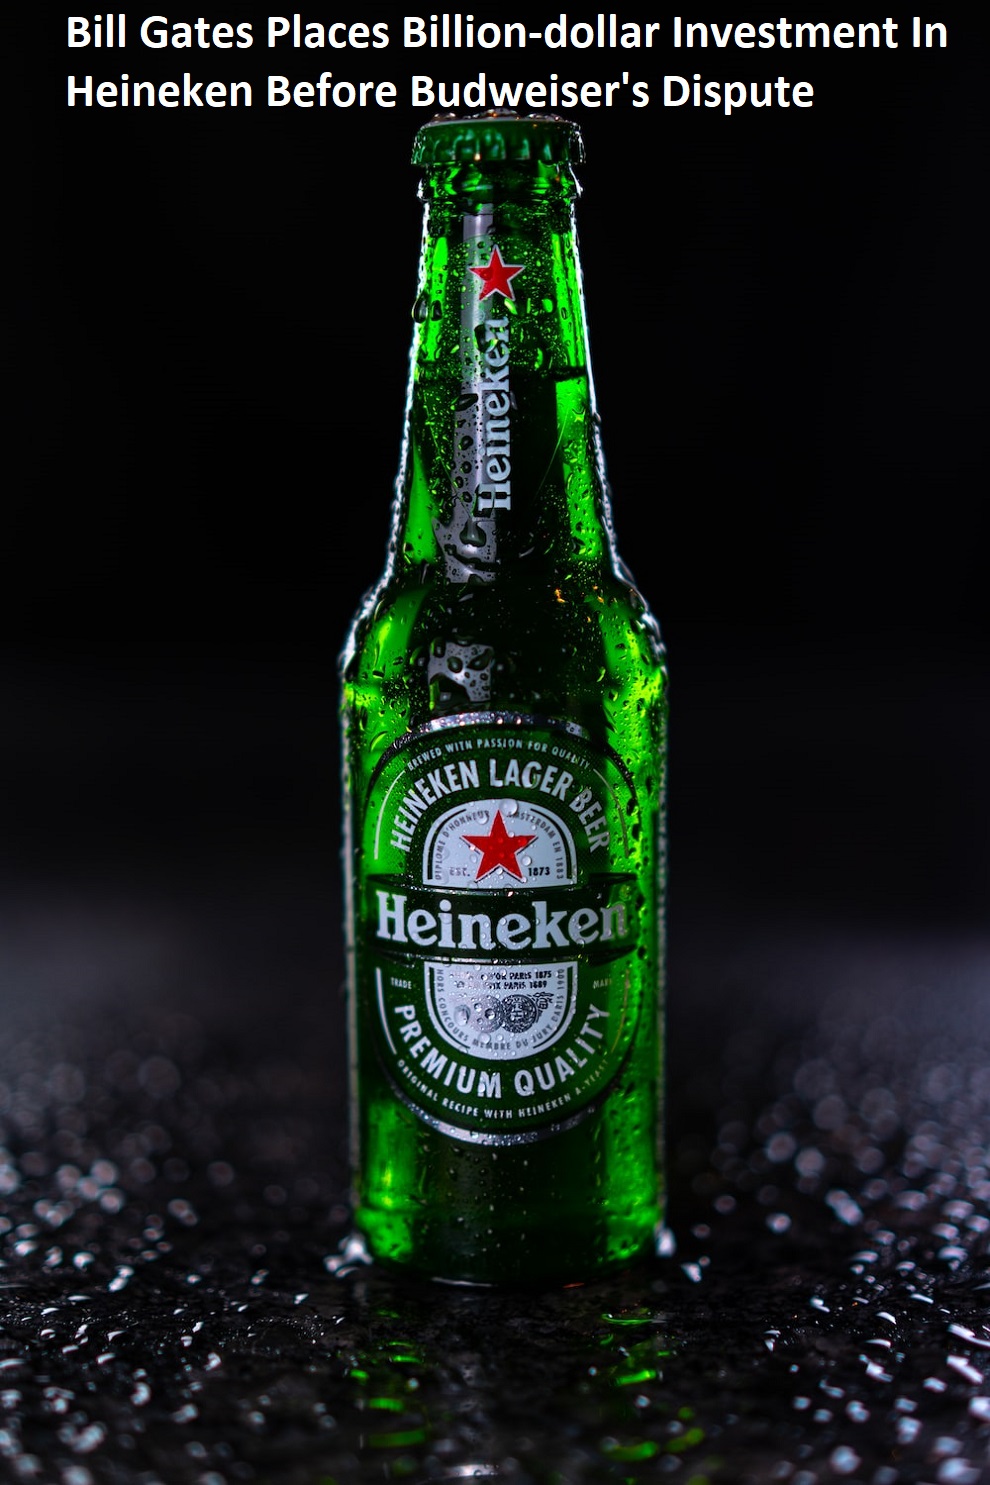 Bill Gates Places Billion-dollar Investment In Heineken Before Budweiser's Dispute, Challenging The Dominance Of The Beer Industry 